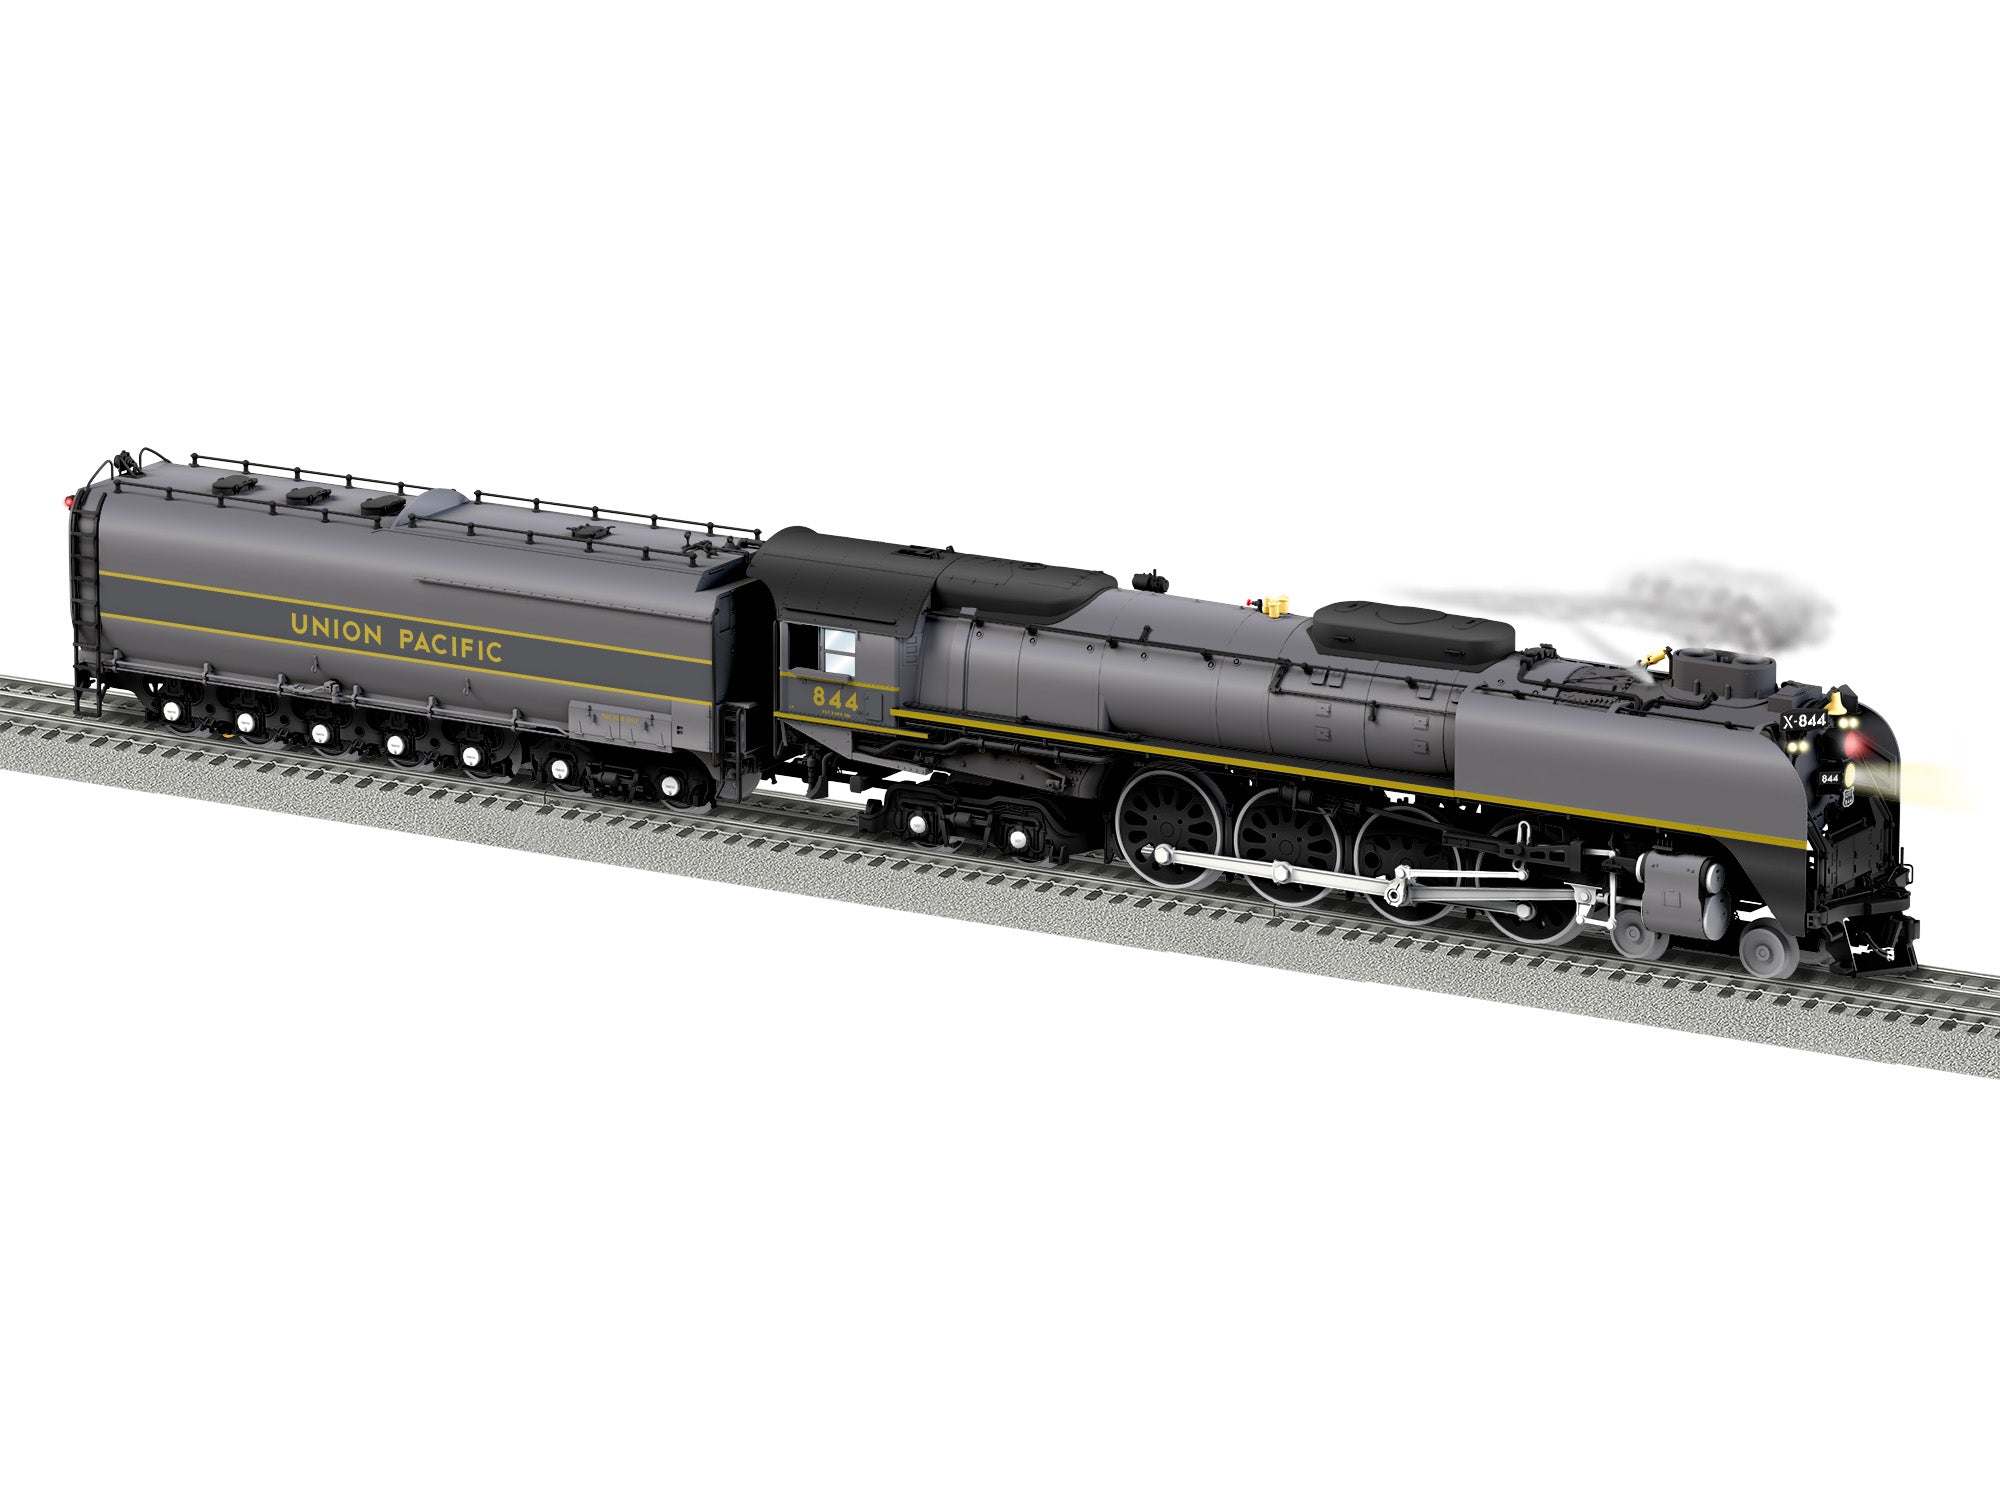 Lionel 2431270 - Legacy FEF-3 Steam Engine "Union Pacific" #844 (Grey/Yellow)